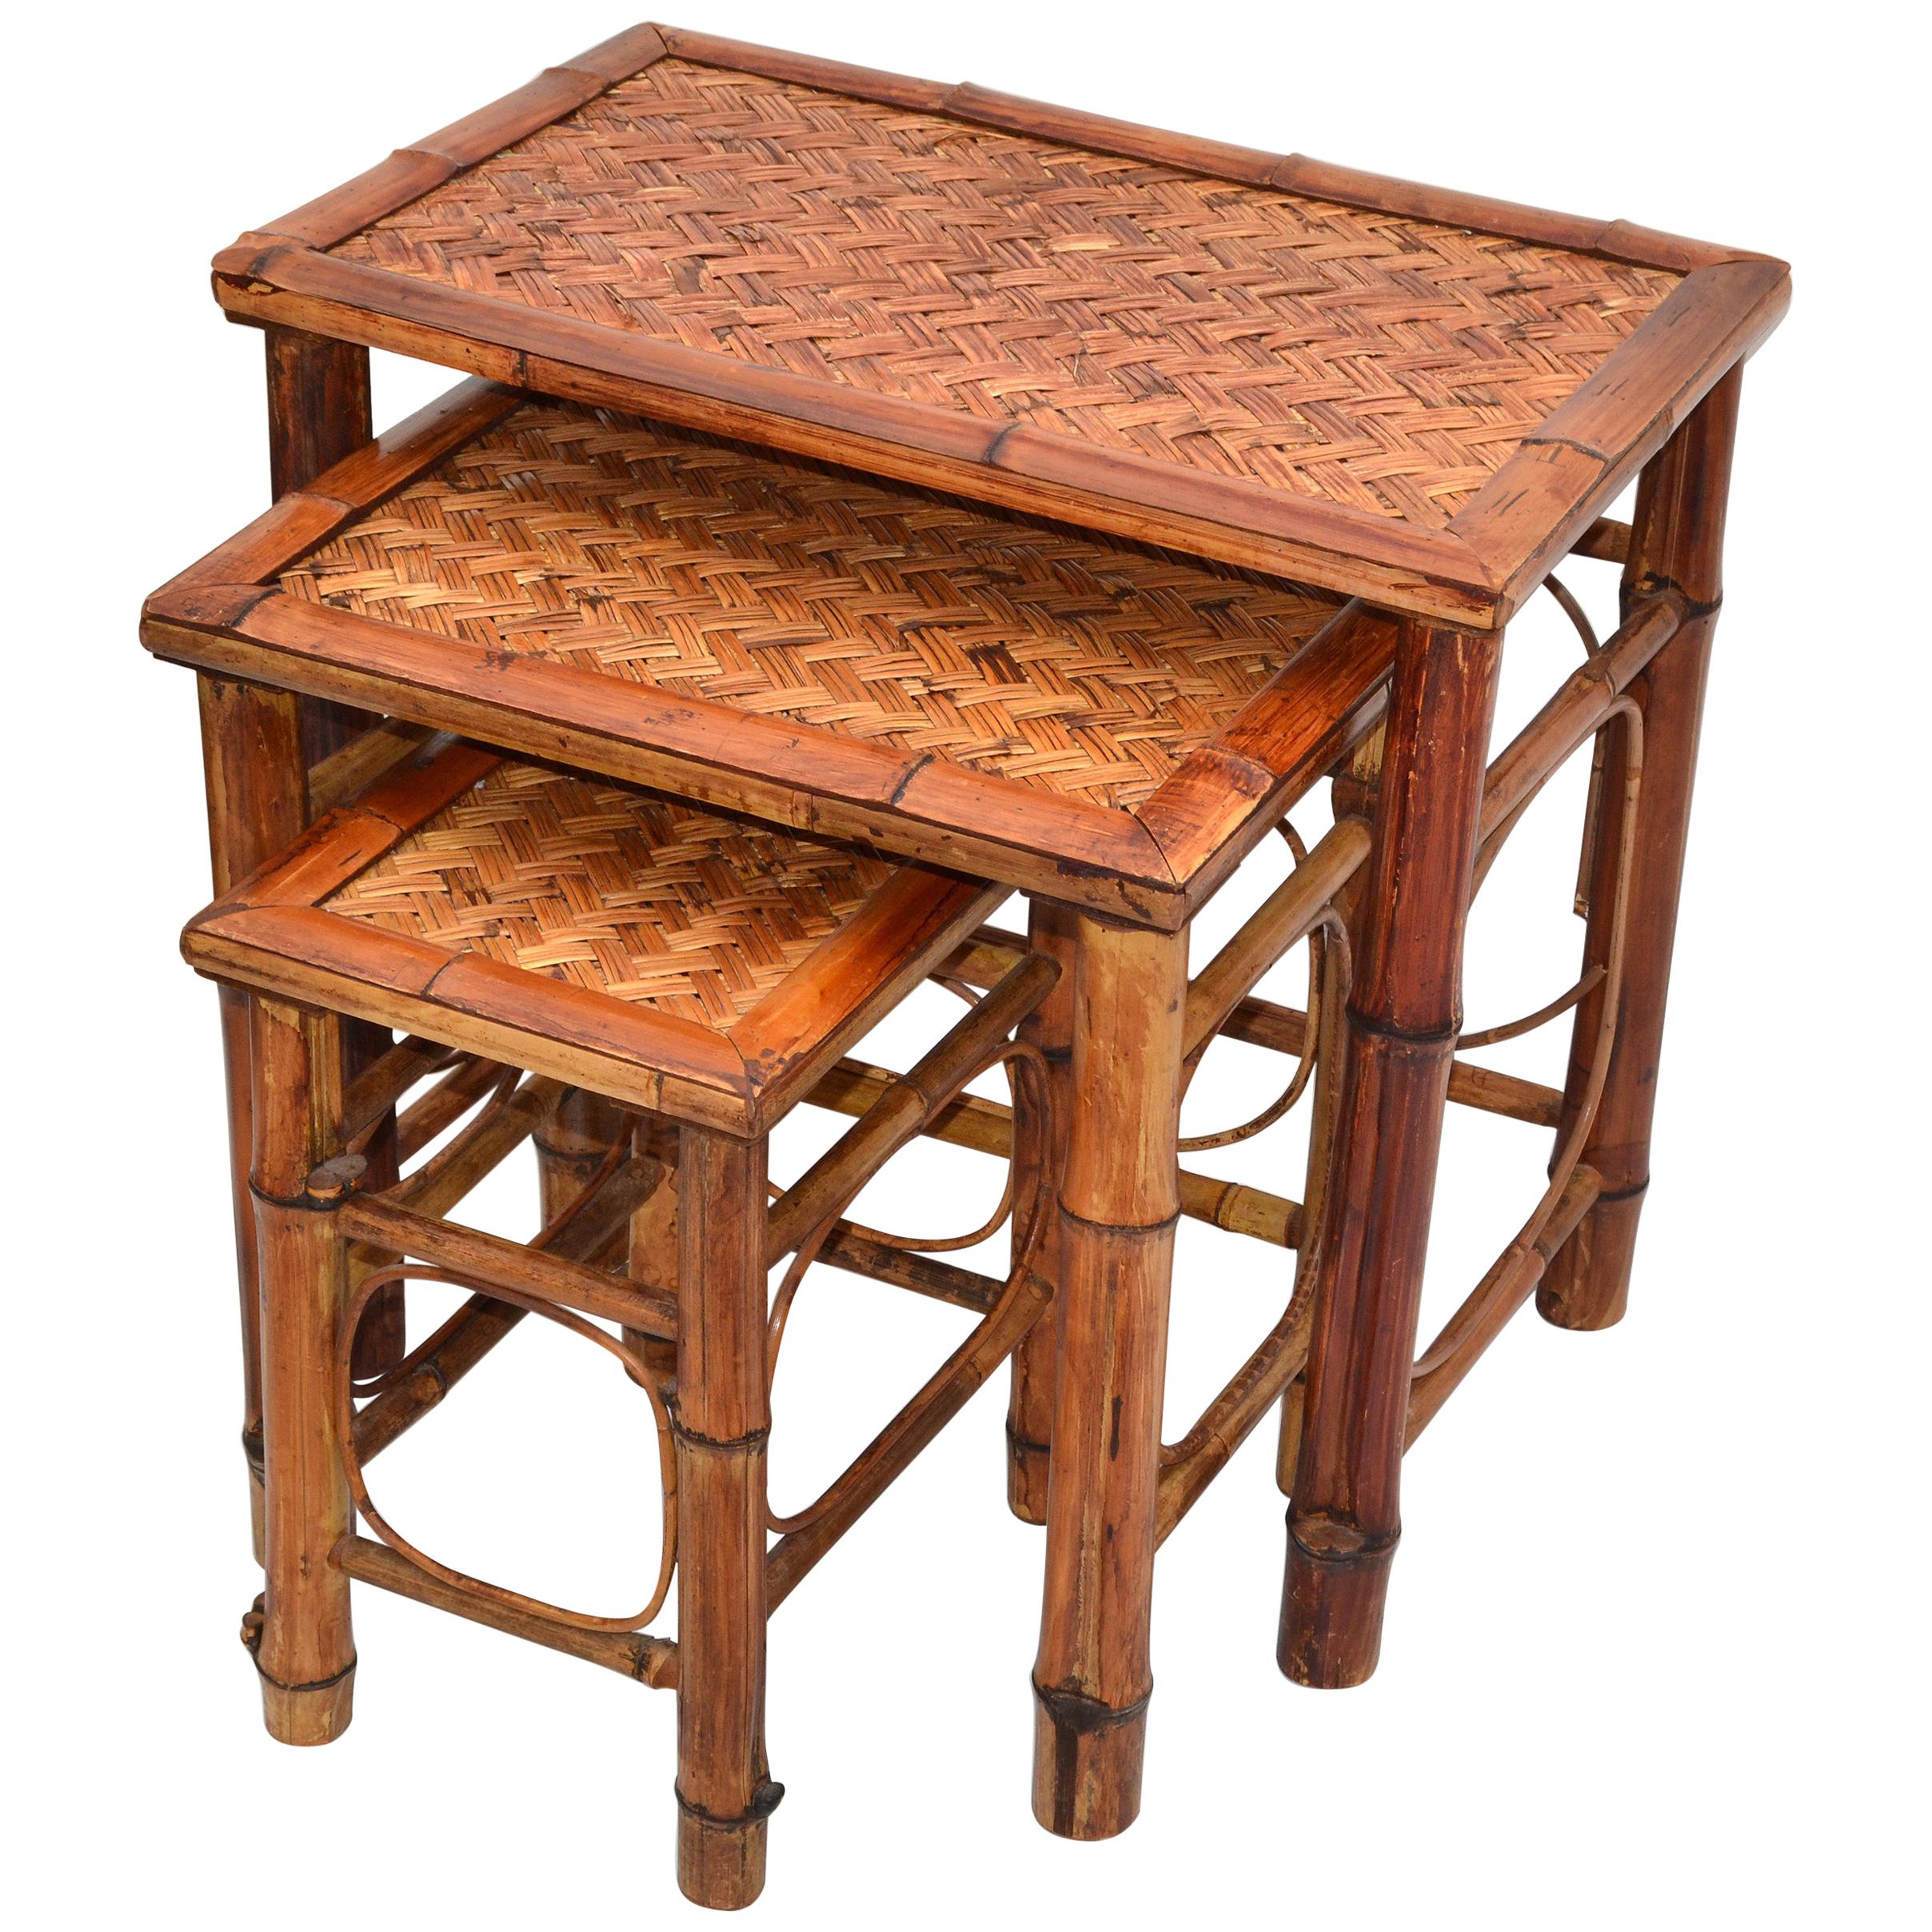 Chinoiserie Bamboo & Cane Nesting Tables Stacking Tables Handcrafted Set of 3